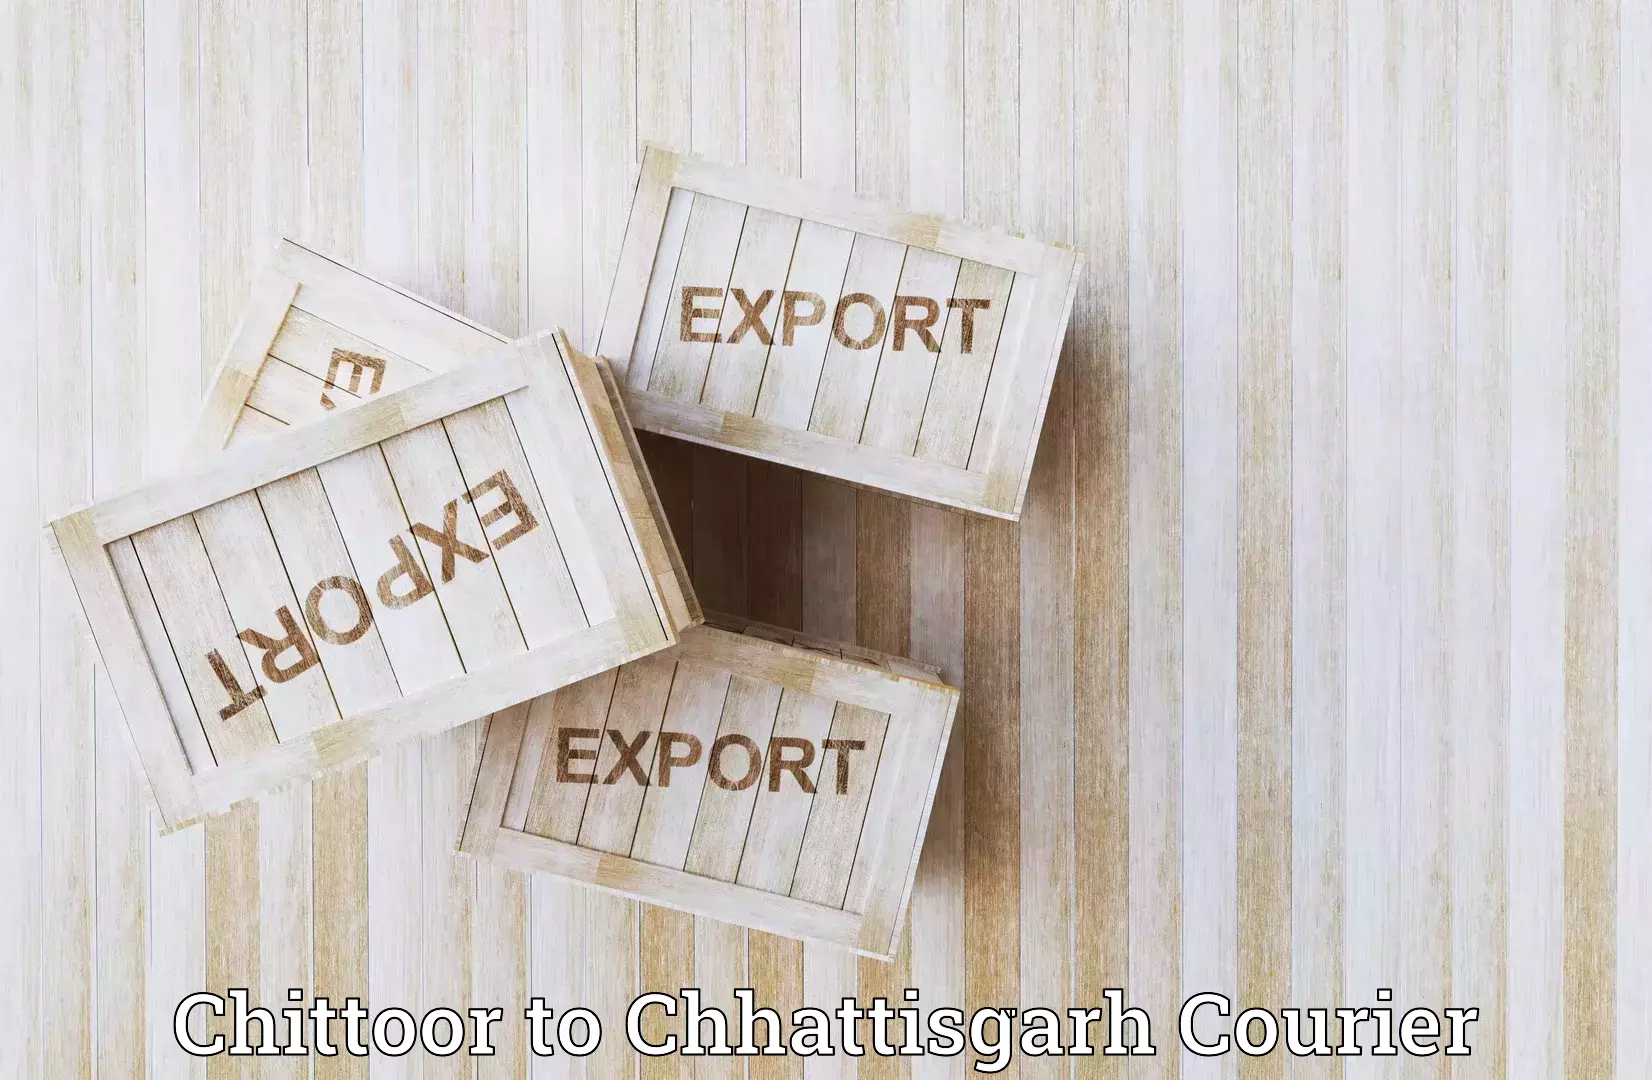 Global shipping networks Chittoor to NIT Raipur